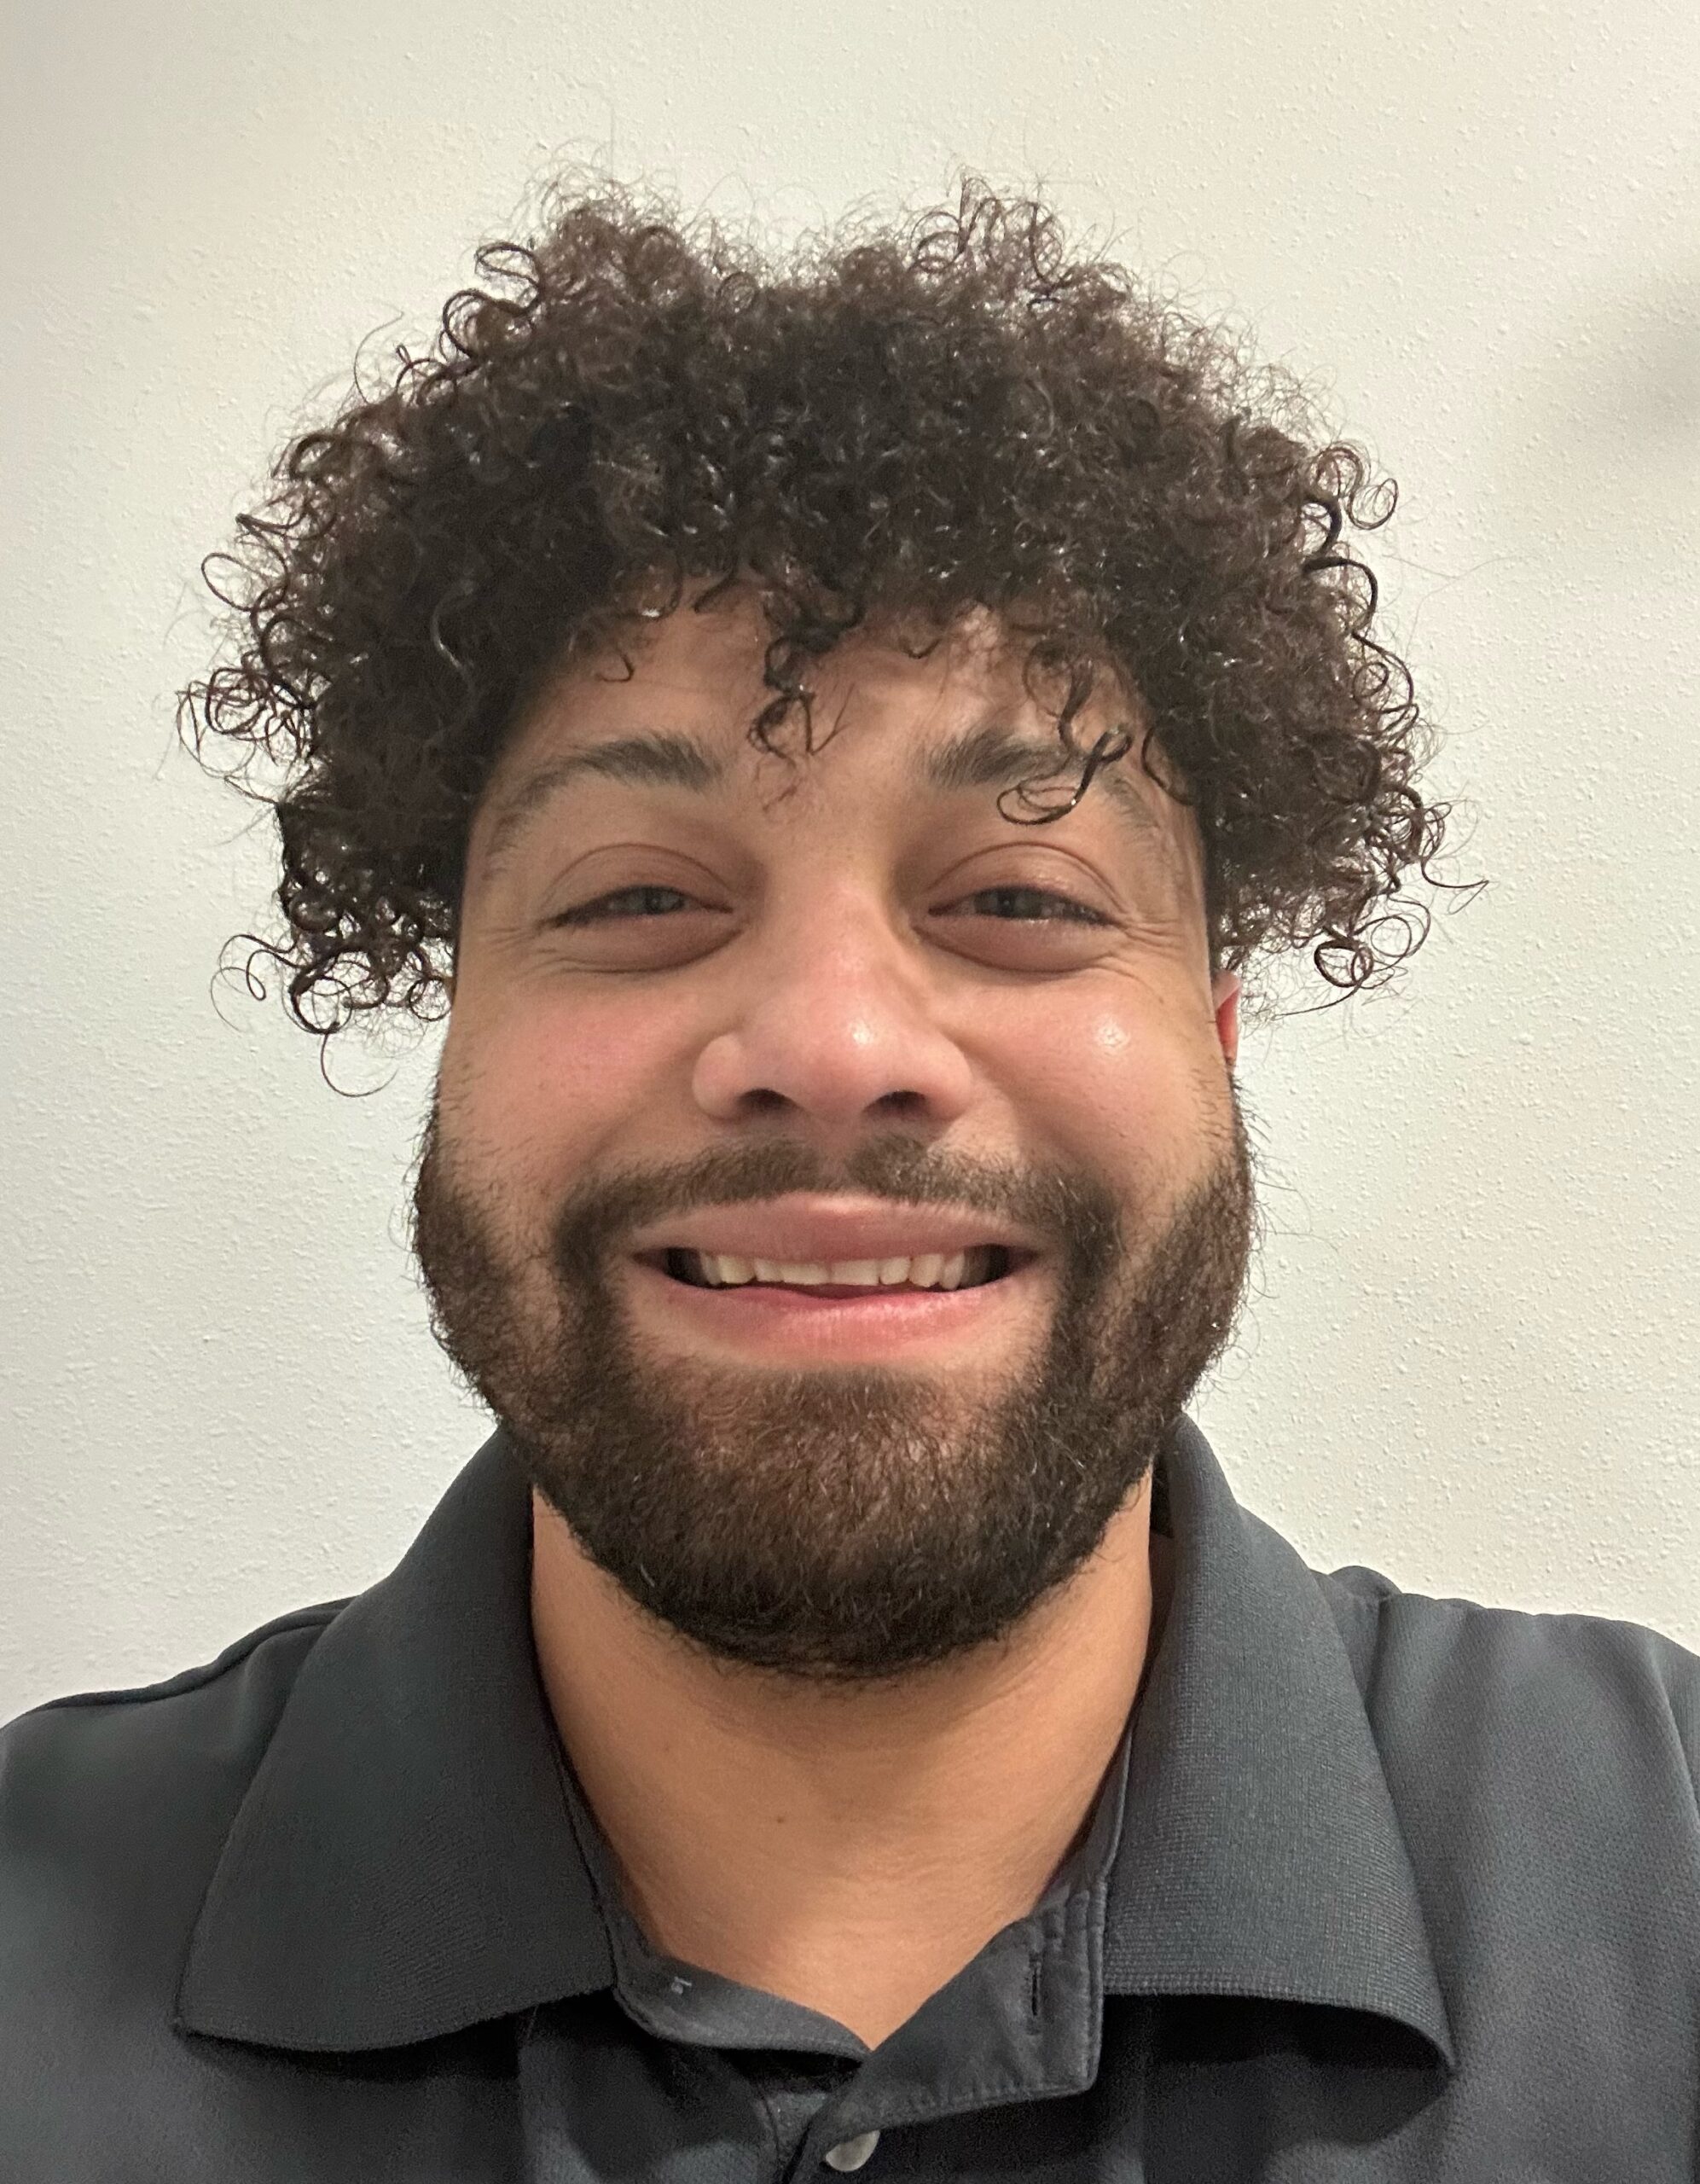 Jordan Scheidecker—an adaptive sports and disabilities support services expert, three-time national championship wheelchair basketball player and national championship coach—has been named wheelchair basketball head coach and disability services specialist at St. Clair County Community College (SC4).